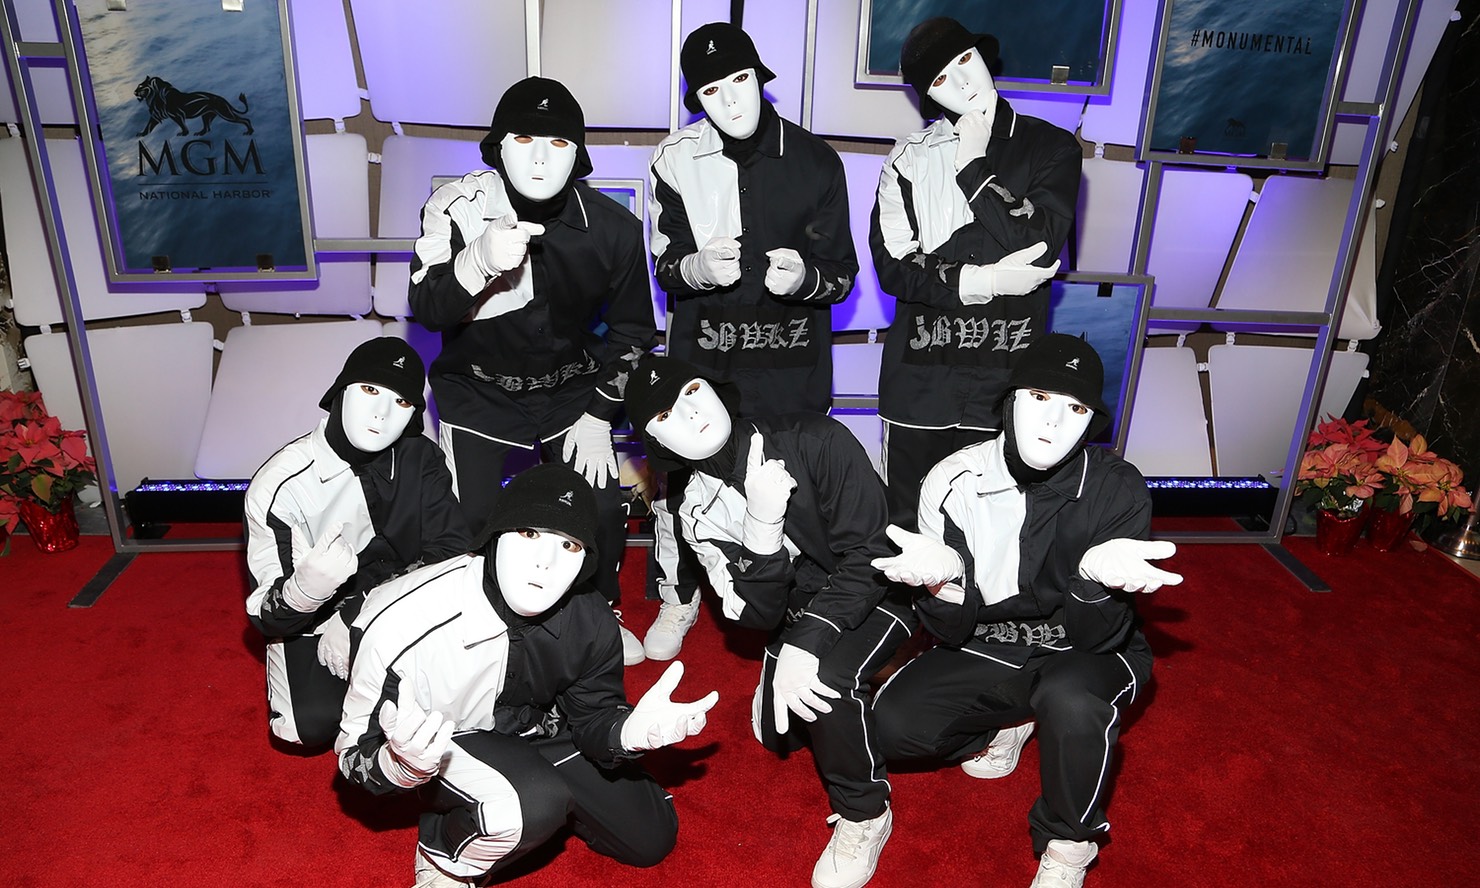 JABBAWOCKEEZ: Who Are The Jabbawockeez? ‘Master Of None’ Featured A Cameo From The Strange Dance Troupe